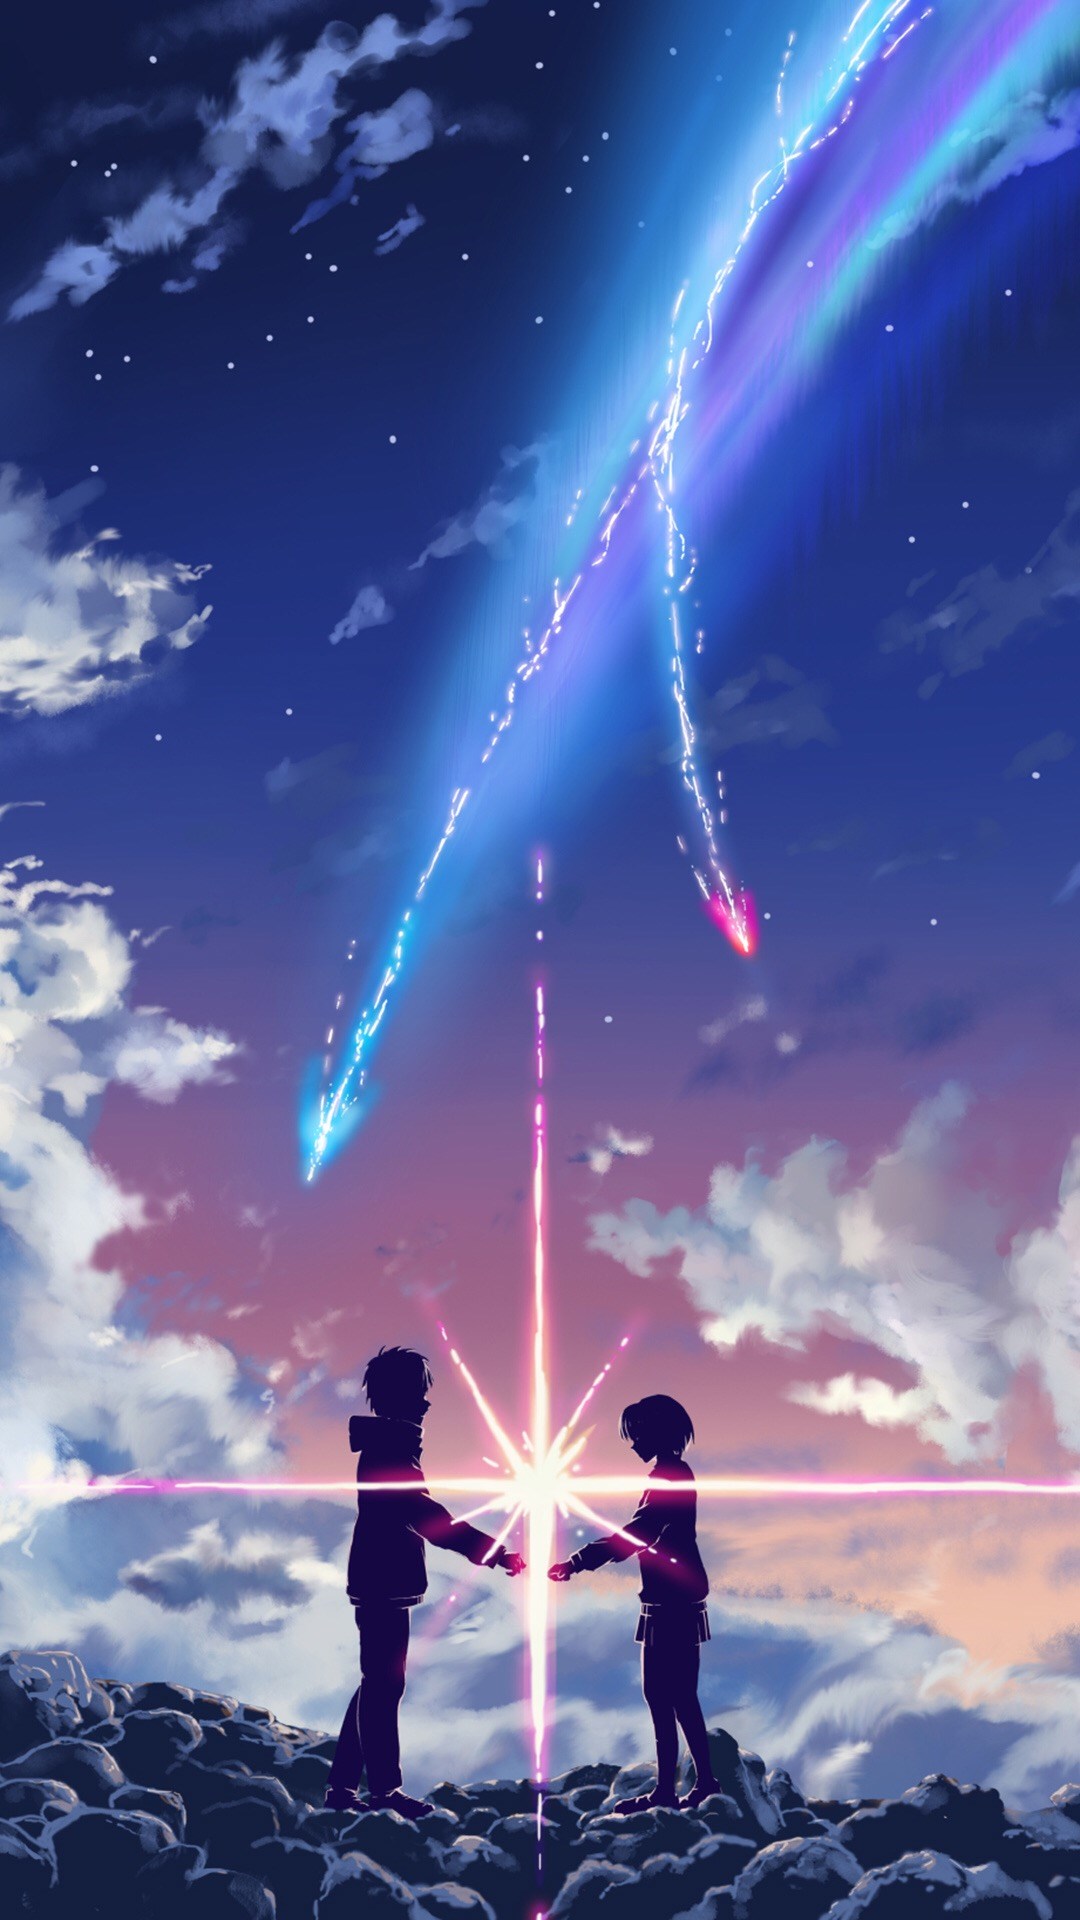 Your Name Wallpaper Iphone Live - 1080x1920 Wallpaper 